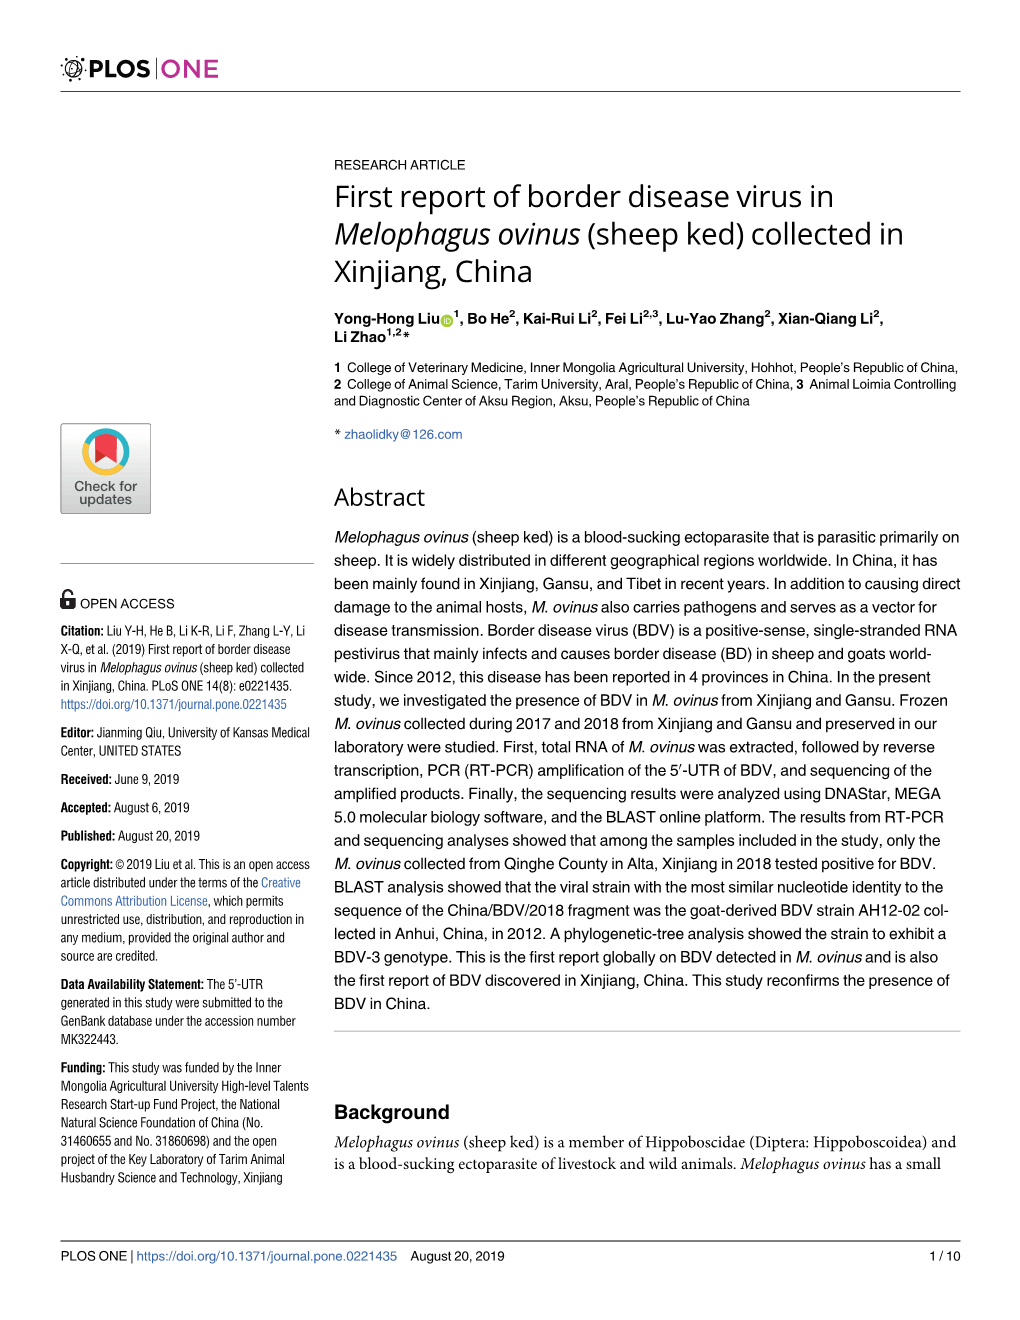 First Report of Border Disease Virus in Melophagus Ovinus (Sheep Ked) Collected in Xinjiang, China